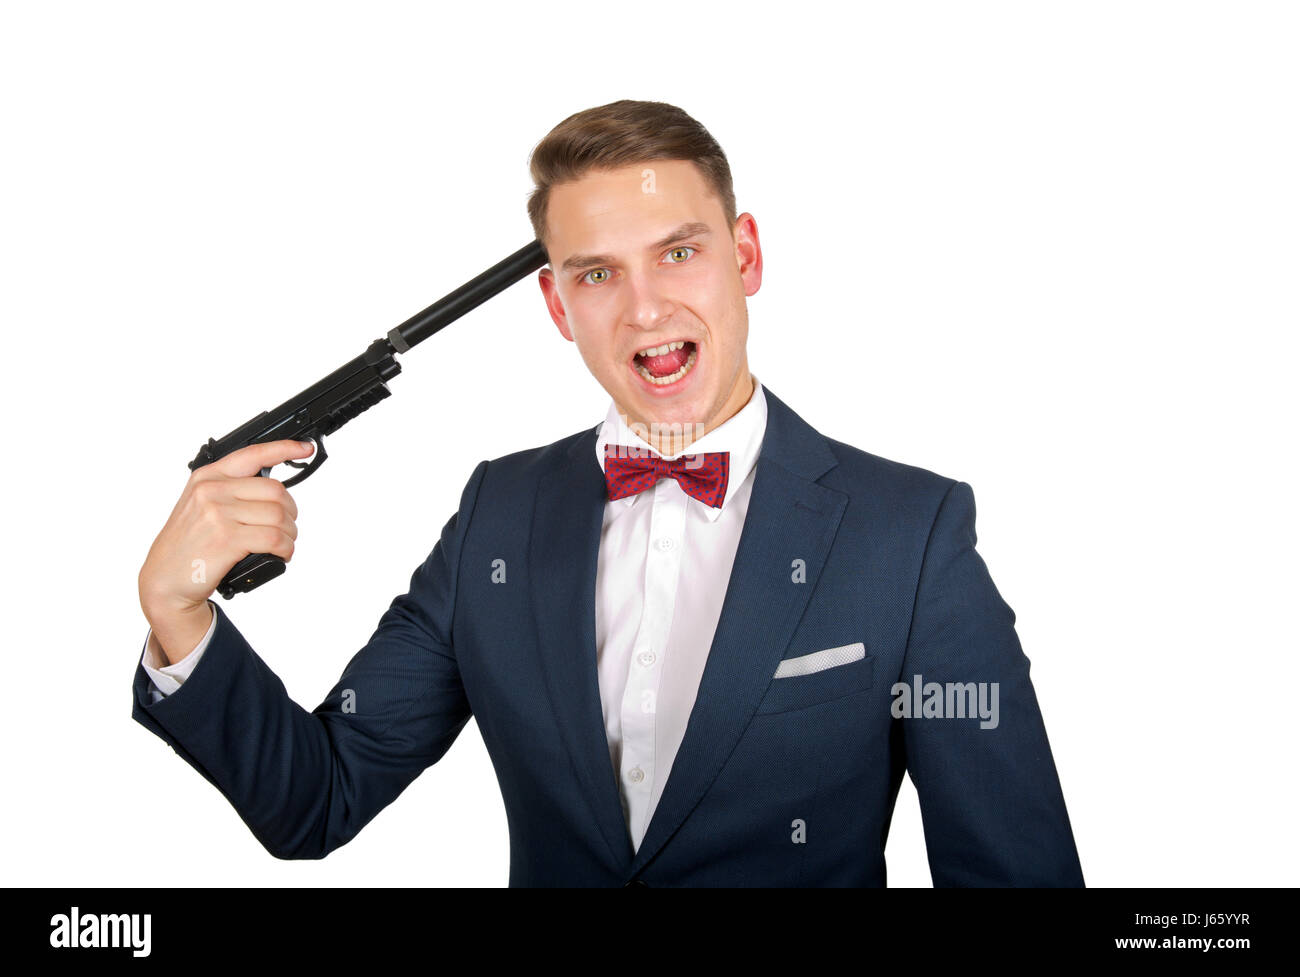 Stressful businessman pointing a gun to his head Stock Photo